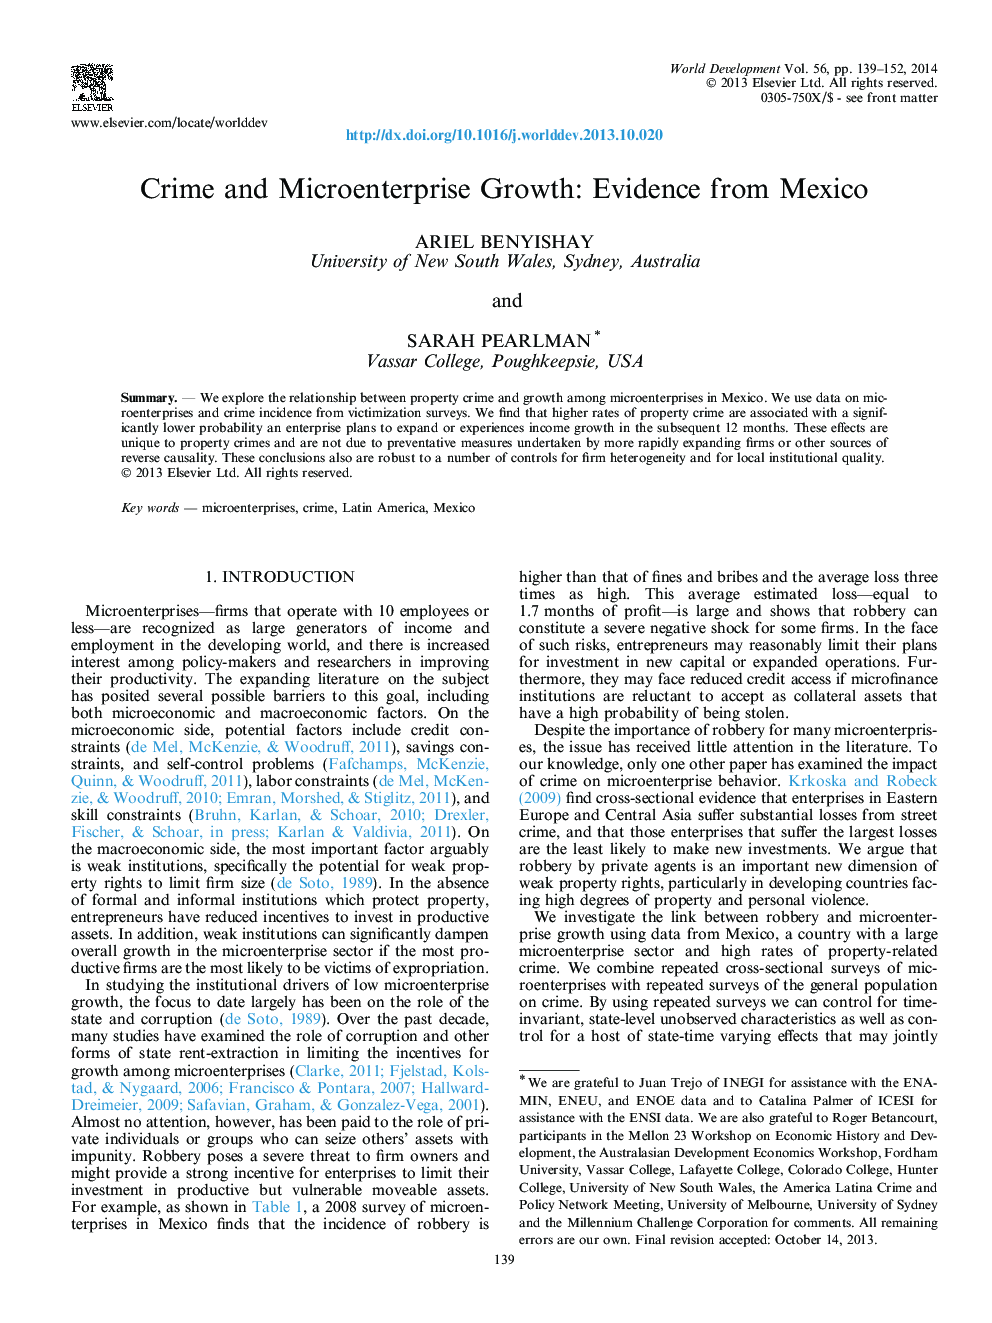 Crime and Microenterprise Growth: Evidence from Mexico